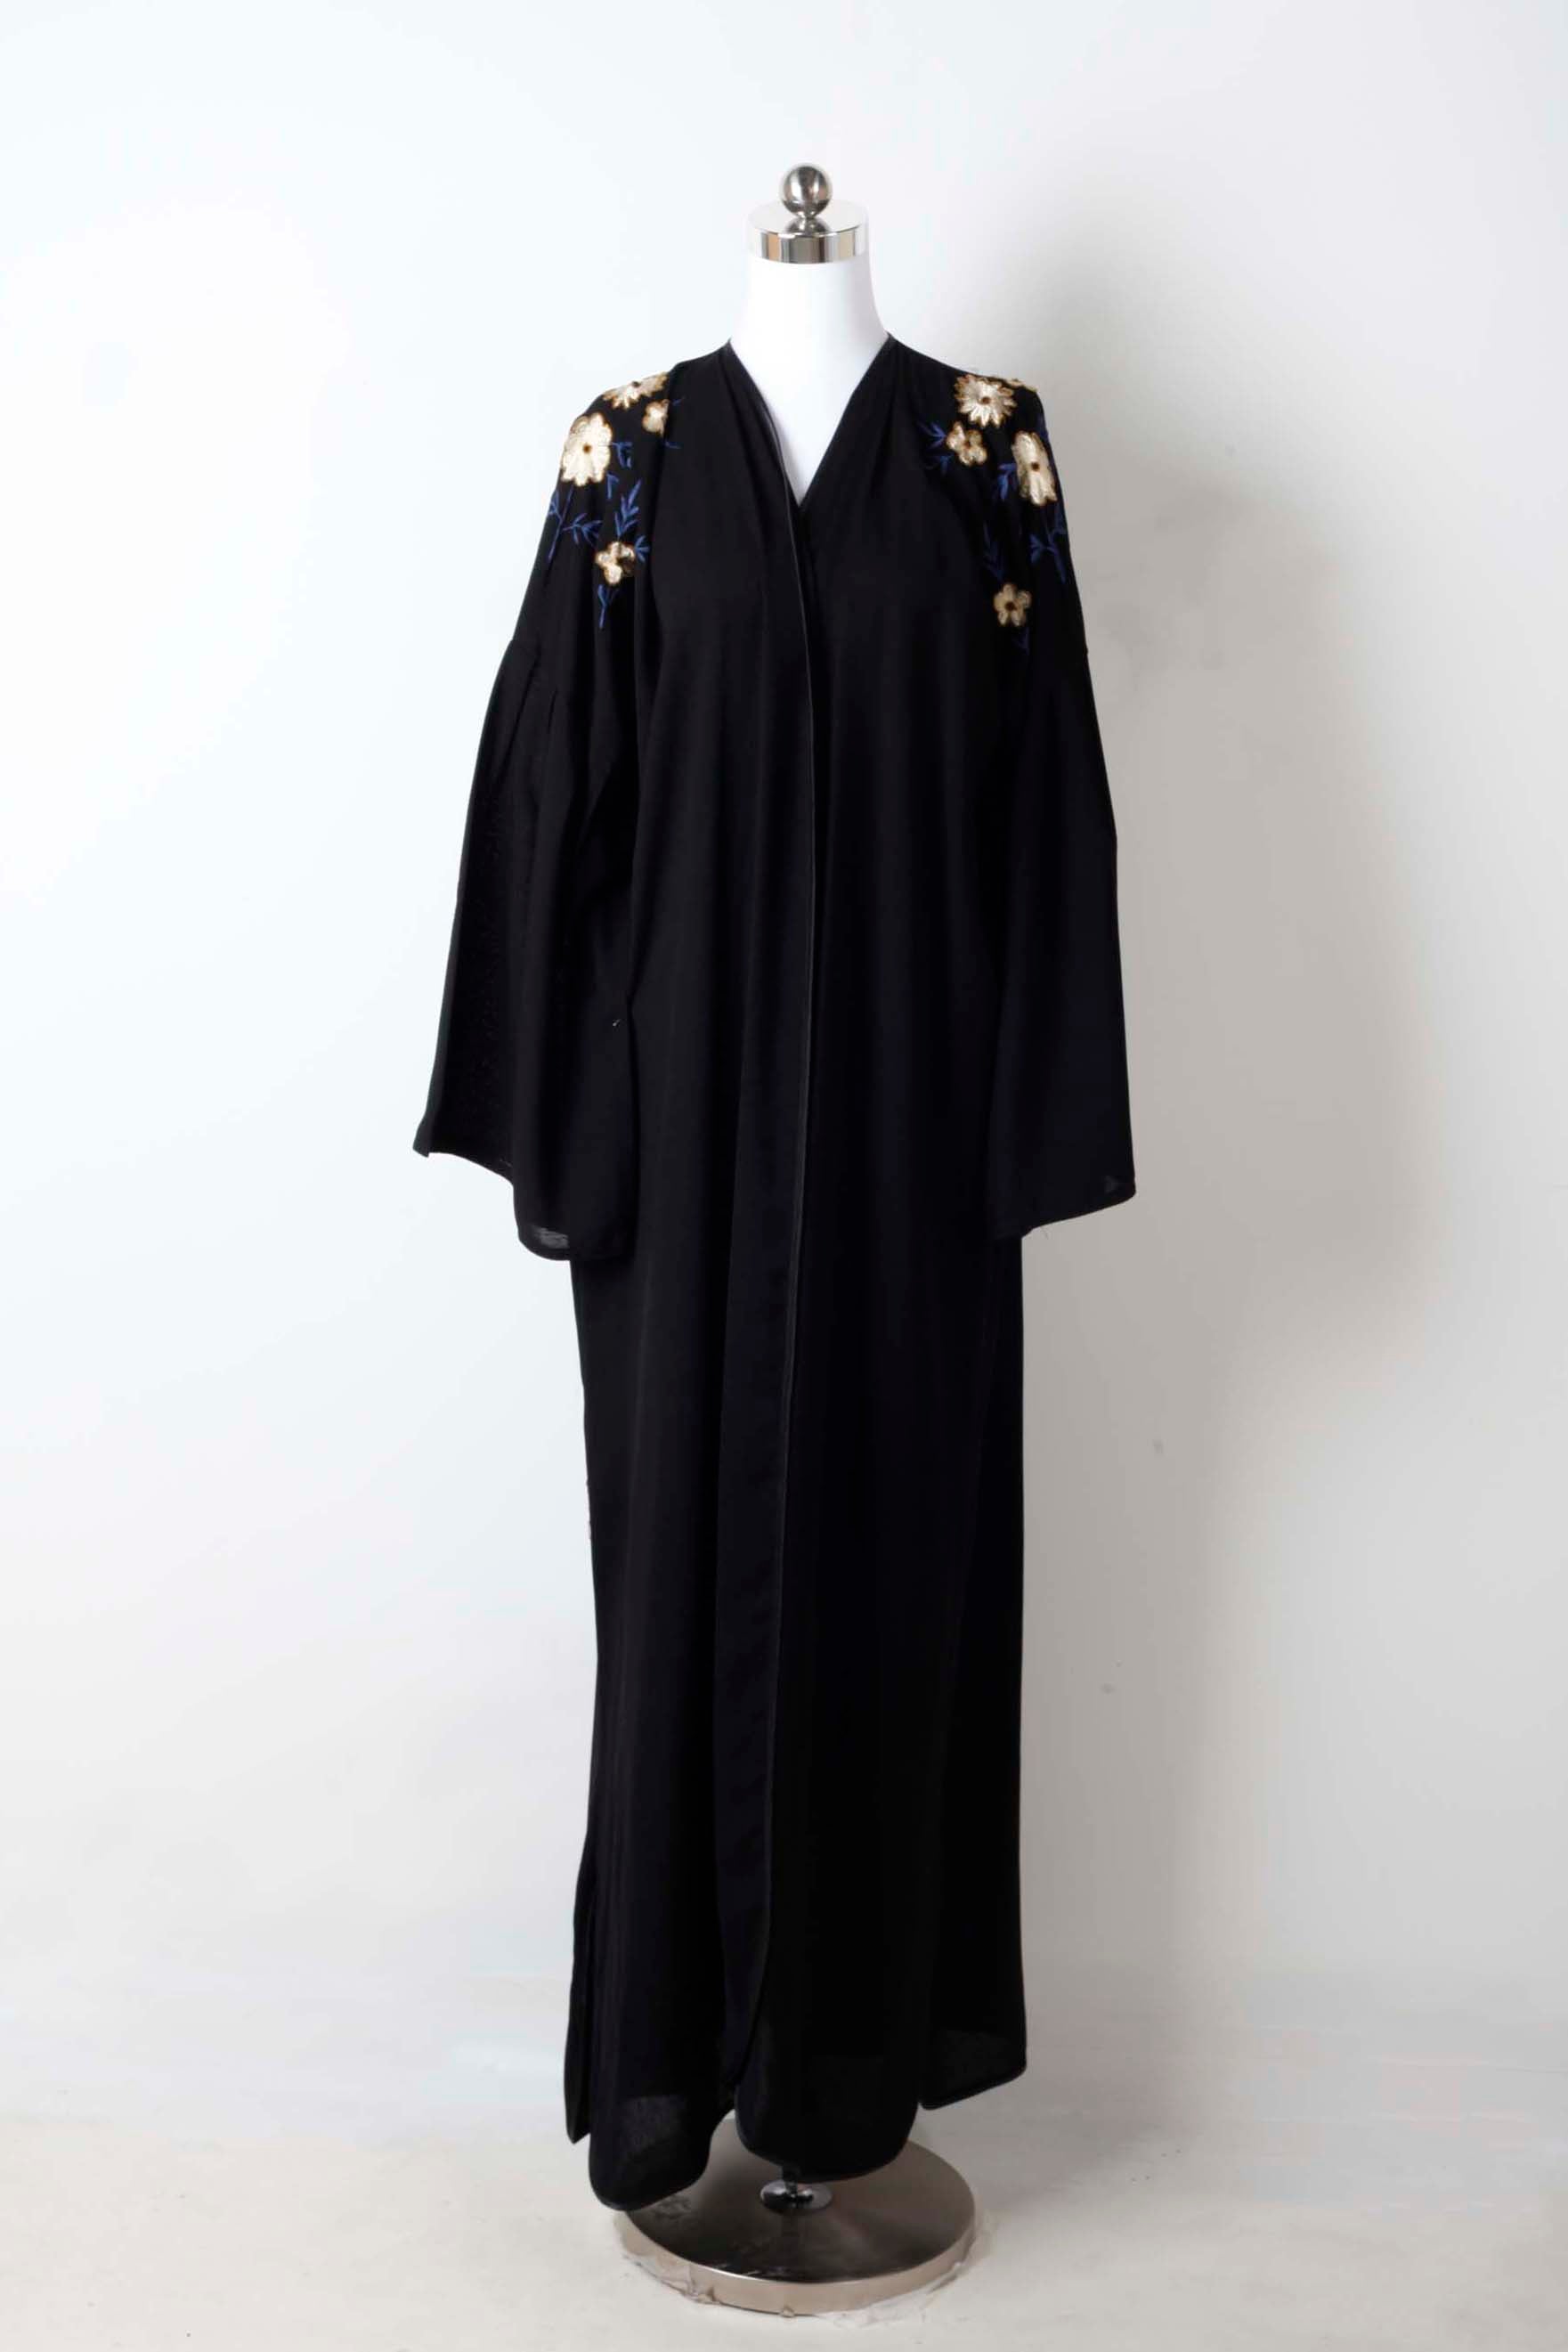 Black Abaya with Floral Embroidery